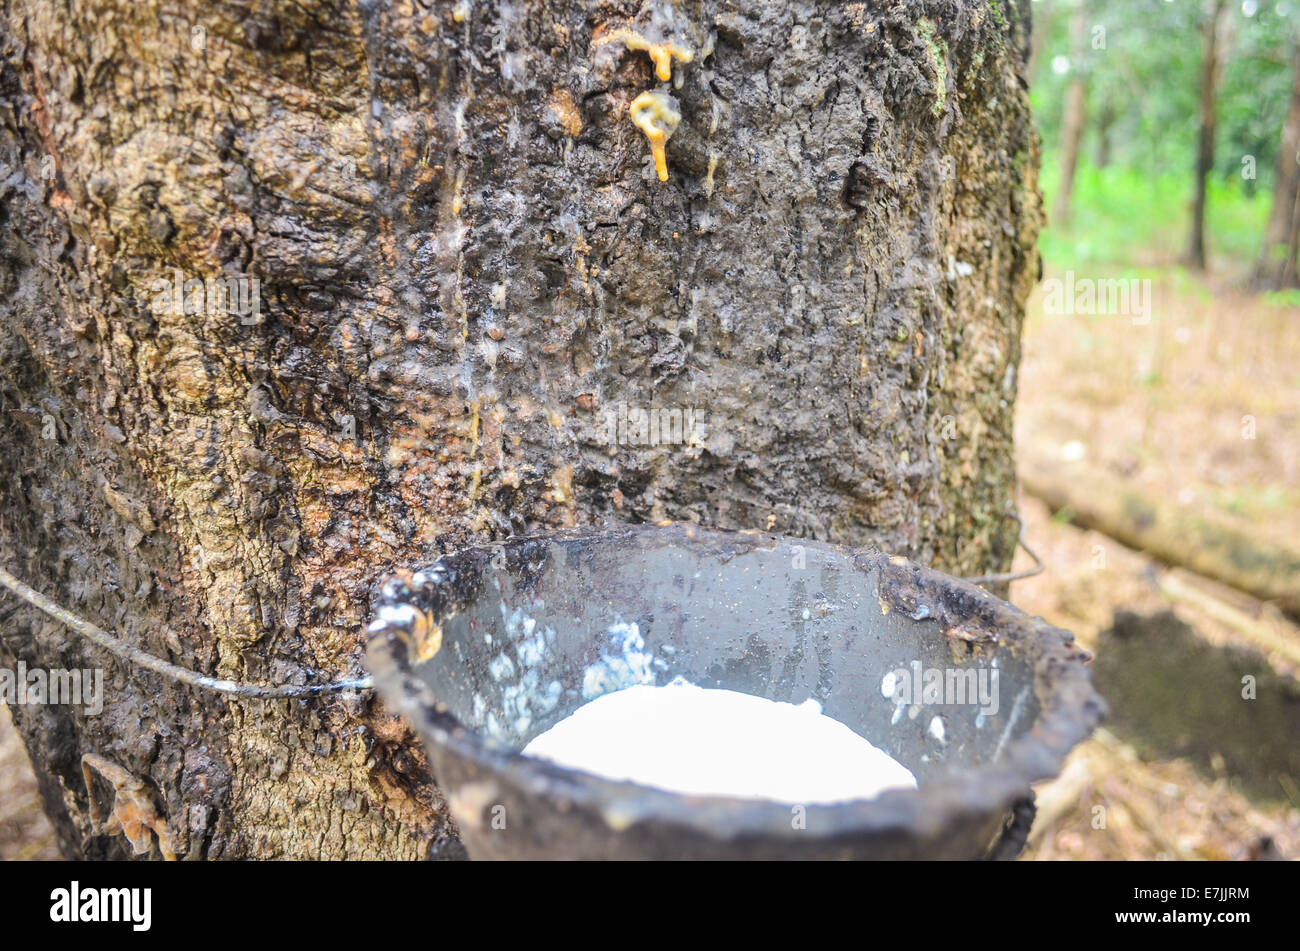 Latex being collected from an hevea tree in the Firestone Natural Rubber Company plantation in Liberia Stock Photo